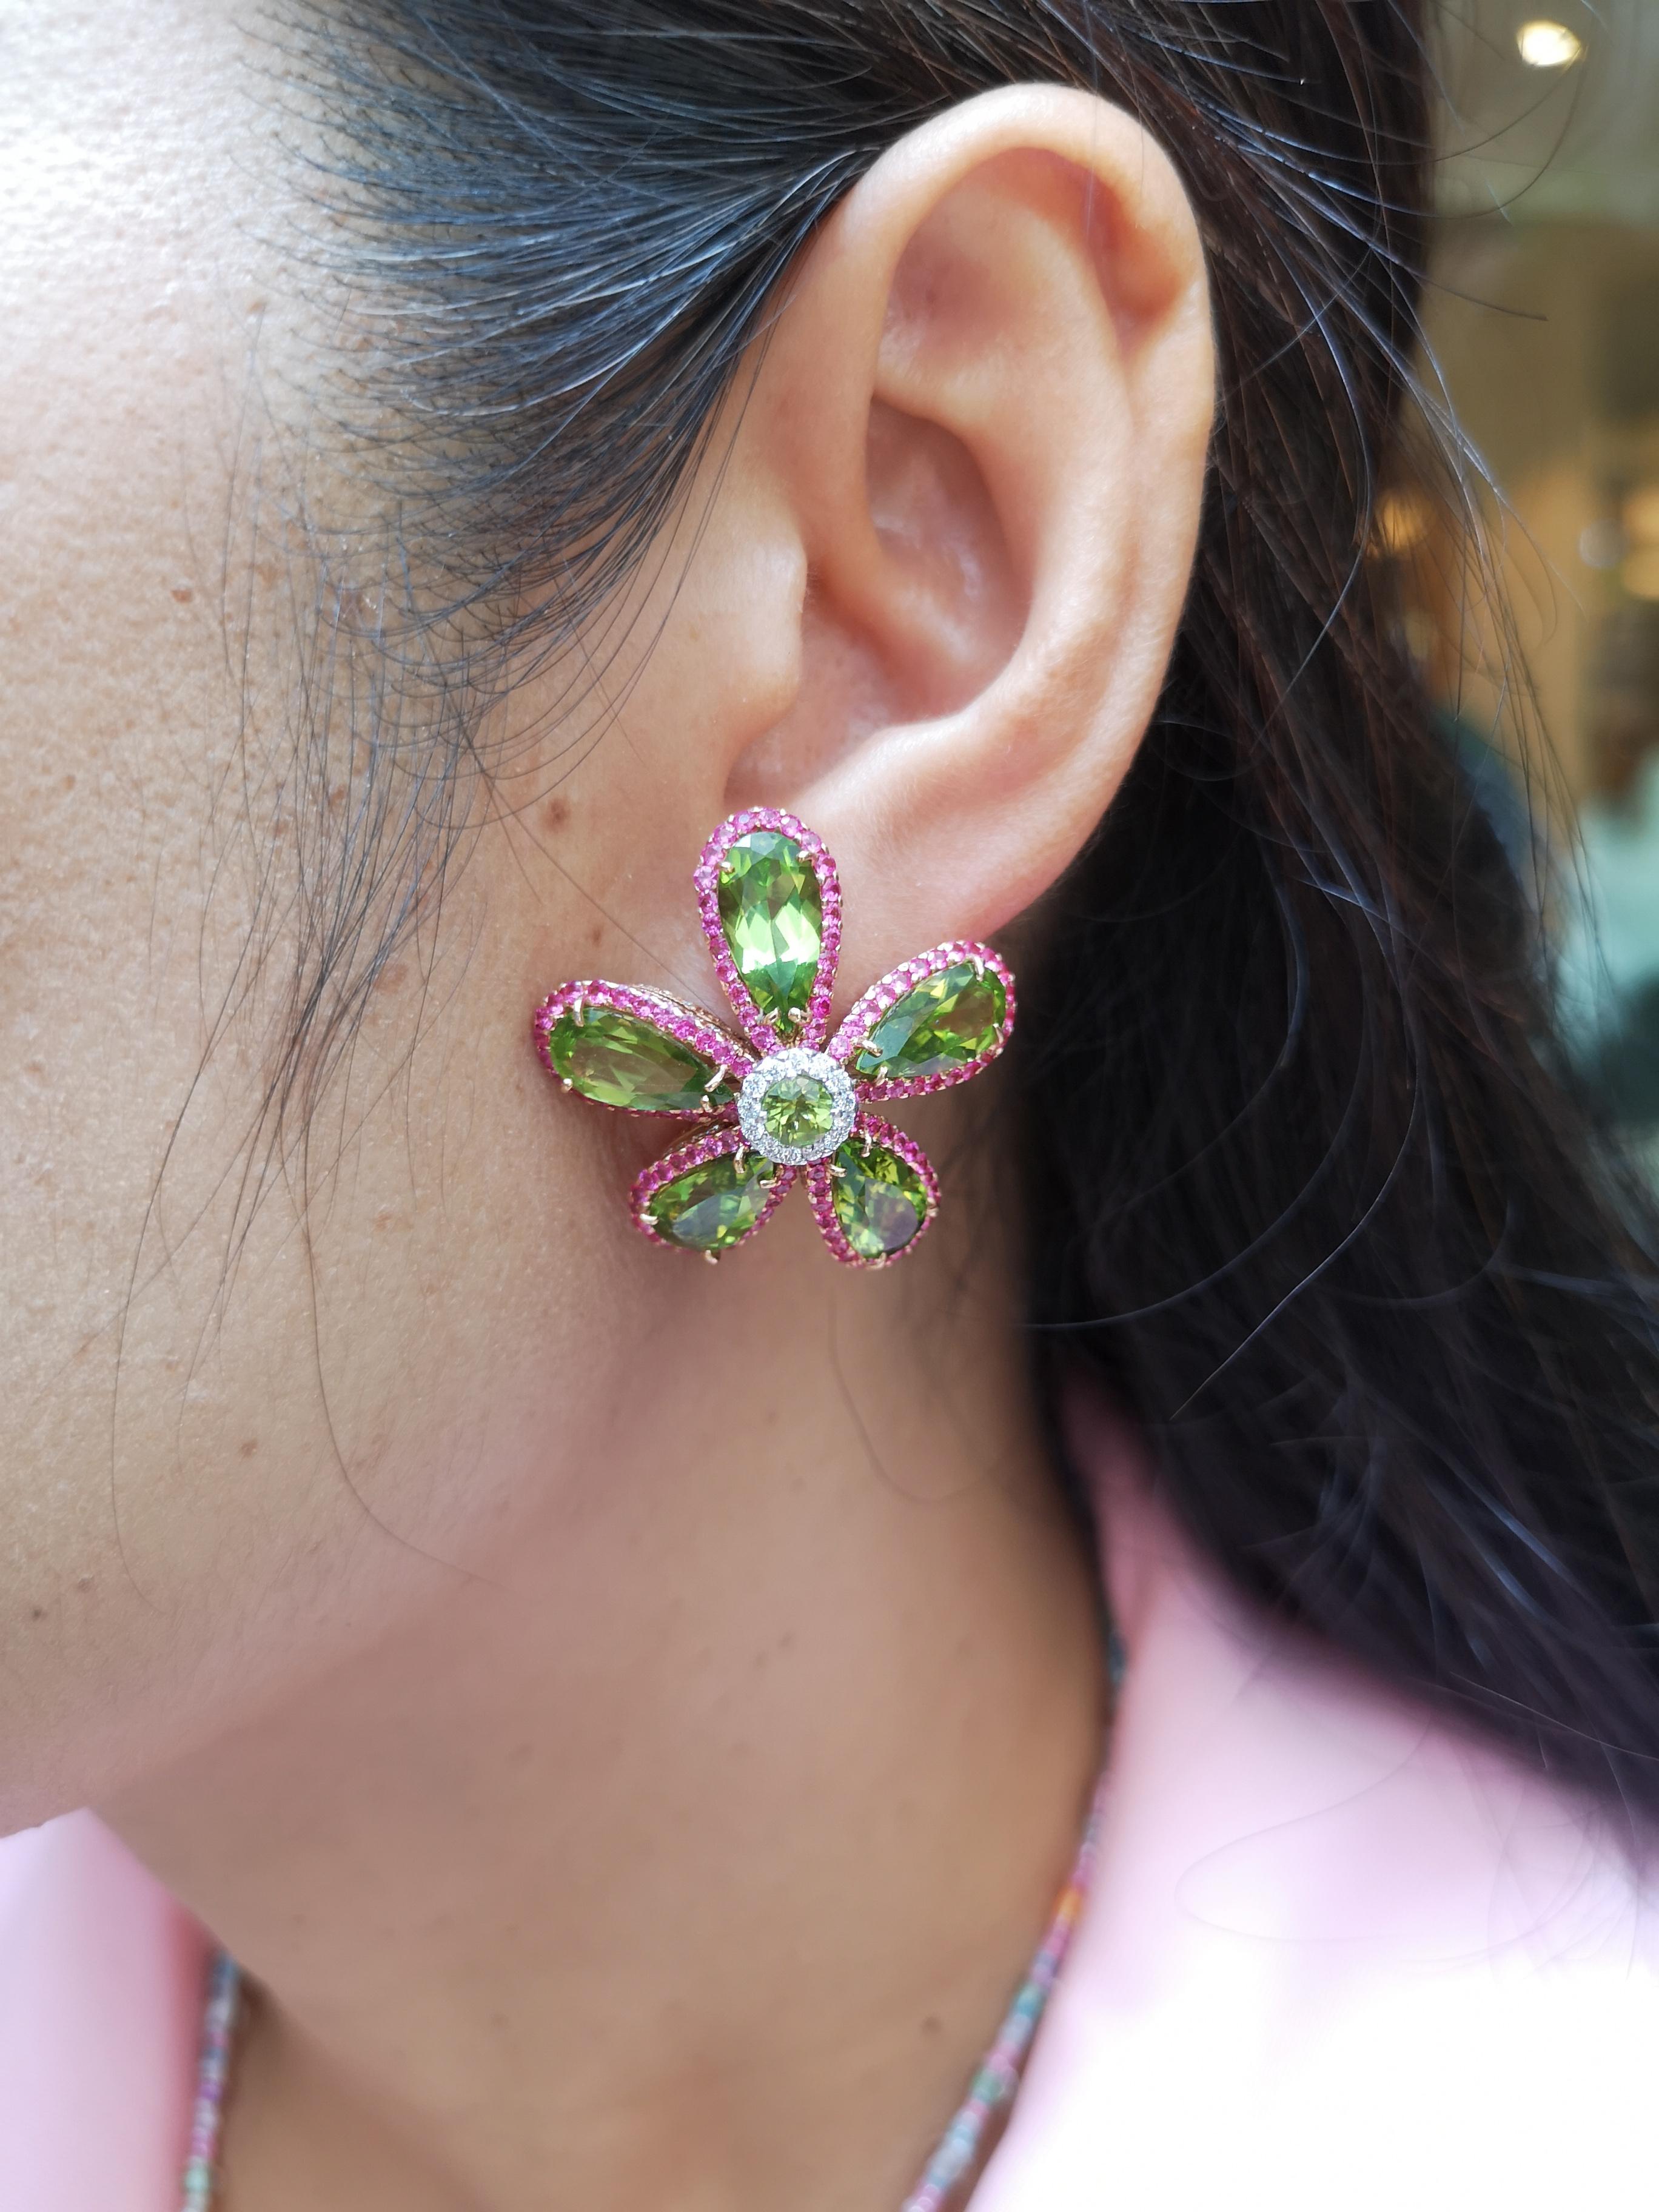 Peridot 20.52 carats with Pink Sapphire 3.0 carats and Diamond 2.58 carats Earrings set in 18 Karat White Gold Settings

Width: 3.0 cm
Length: 3.0 cm 

